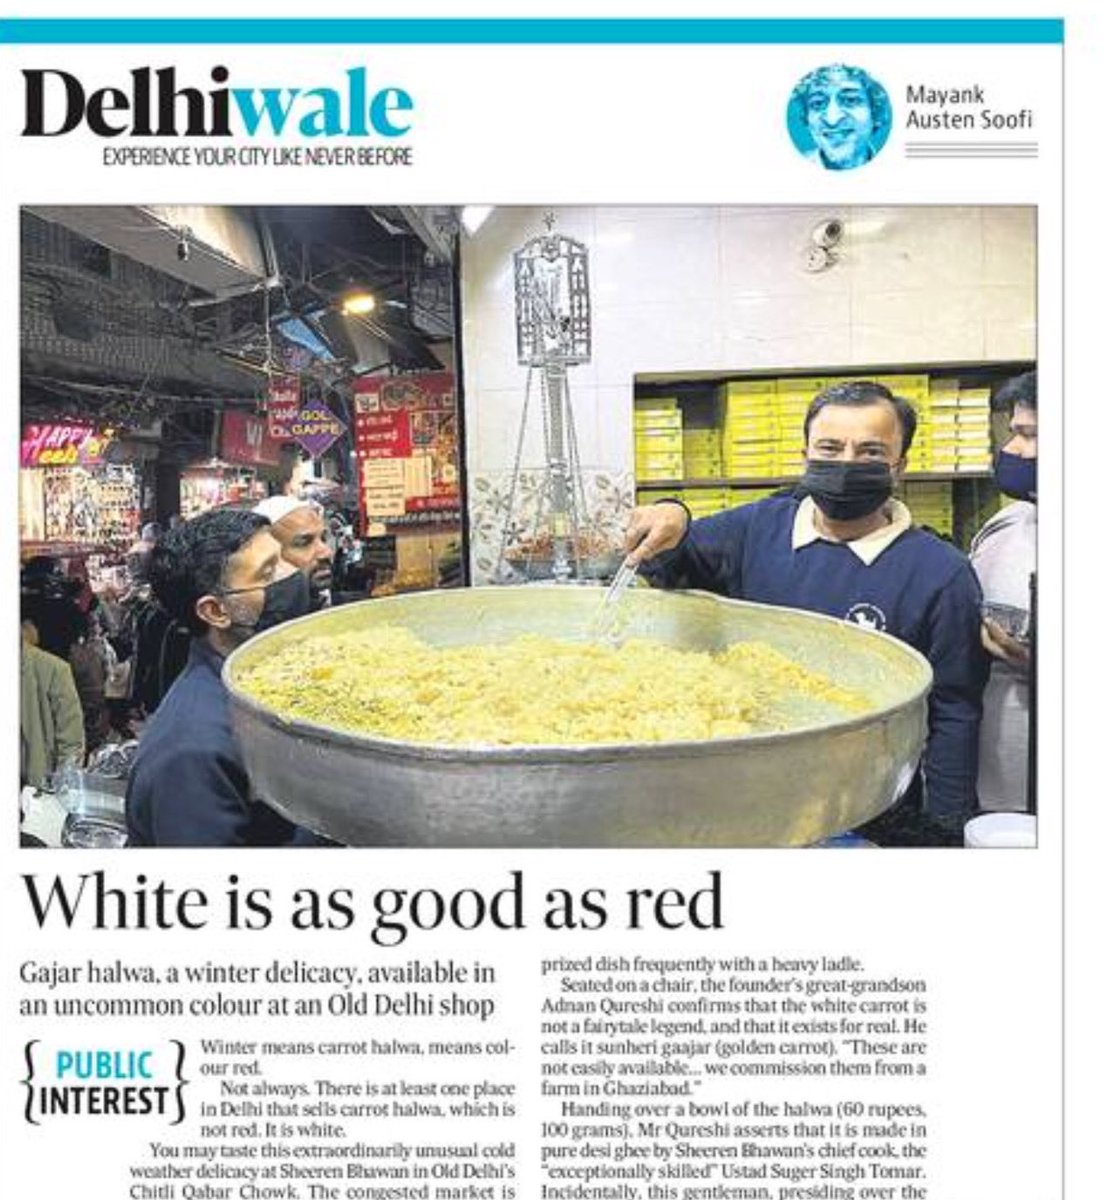 O my God! All my life I loved the winter season’s red carrot halwa. And then I discovered Old Delhi’s rare-enigmatic carrot halwa, which is NOT red but white!… my daily City Life dispatch in Hindustan Times today! https://t.co/pINDwM11fW